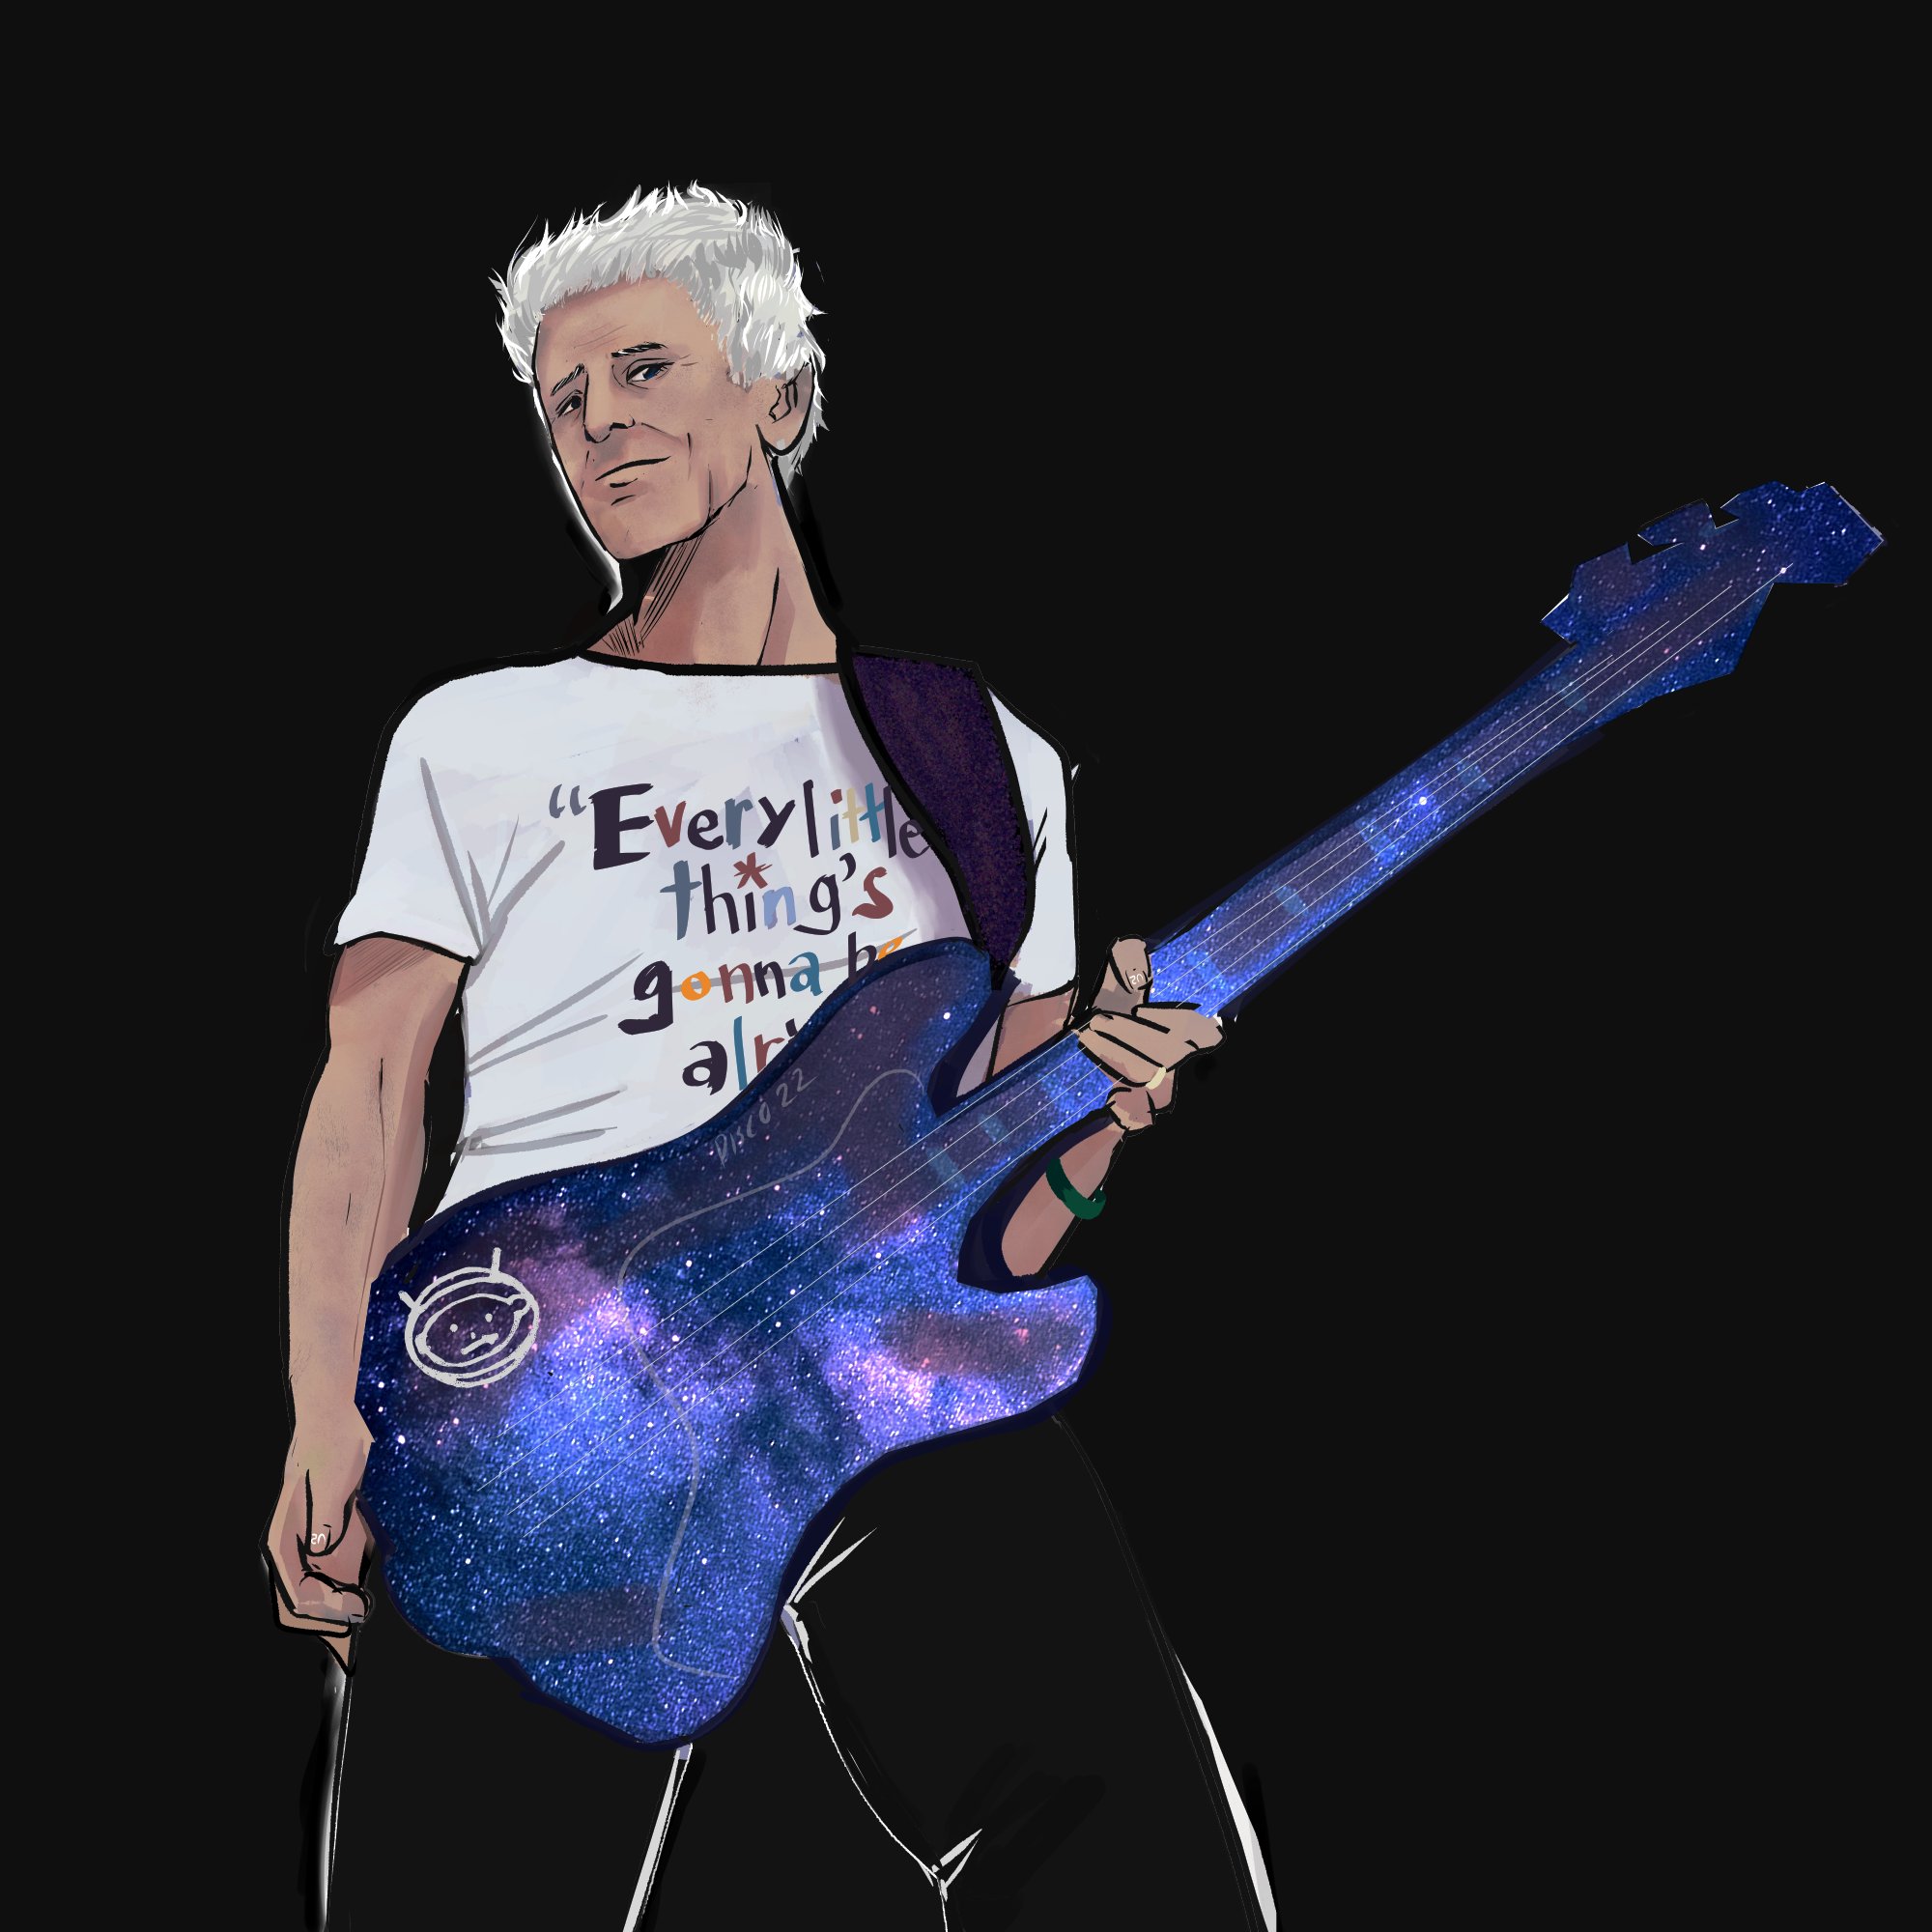 Happy birthday to the man, the myth, the legend, the babe of bass, the jazzman himself, Adam Clayton! 